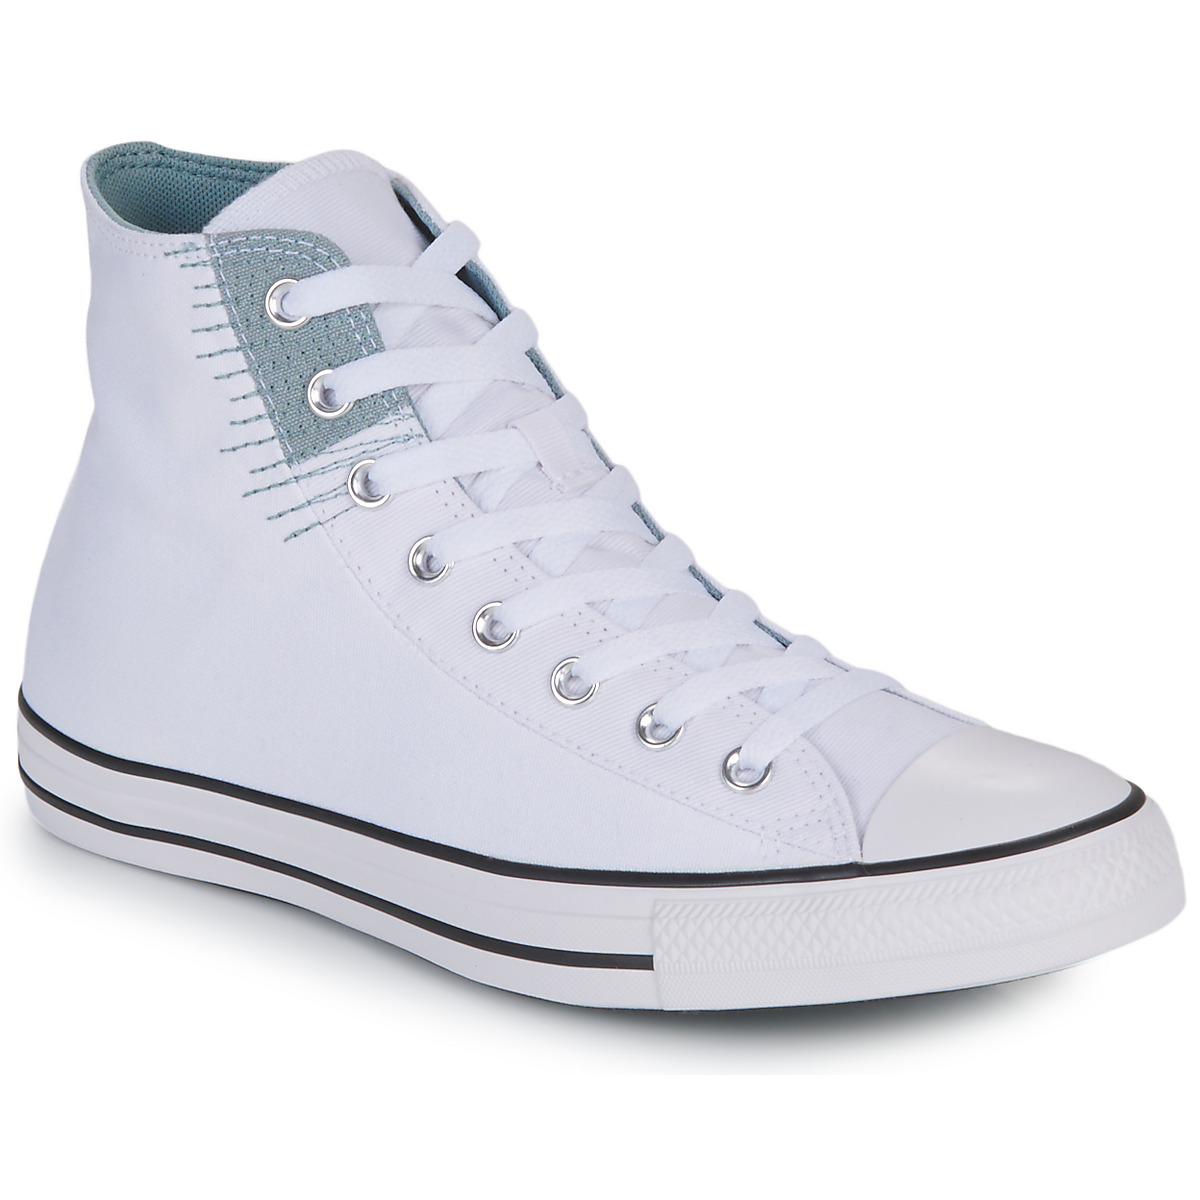 Converse Chuck Taylor All Star Summer Utility-summer Utility White